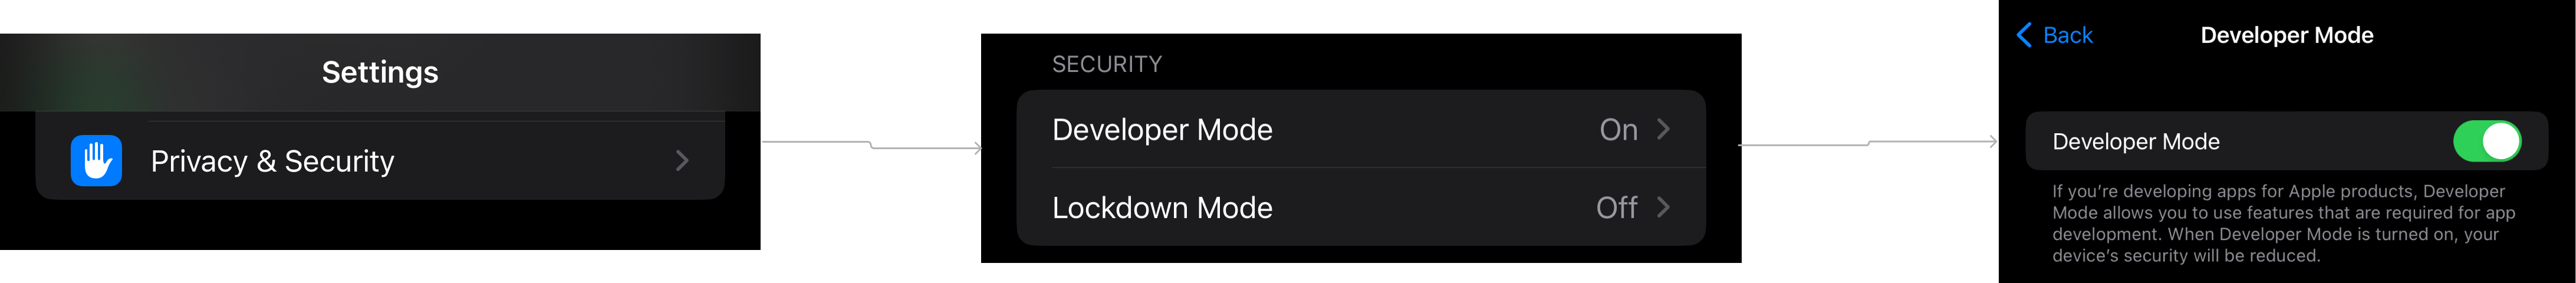 Enable deveper mode in settings on iPhone